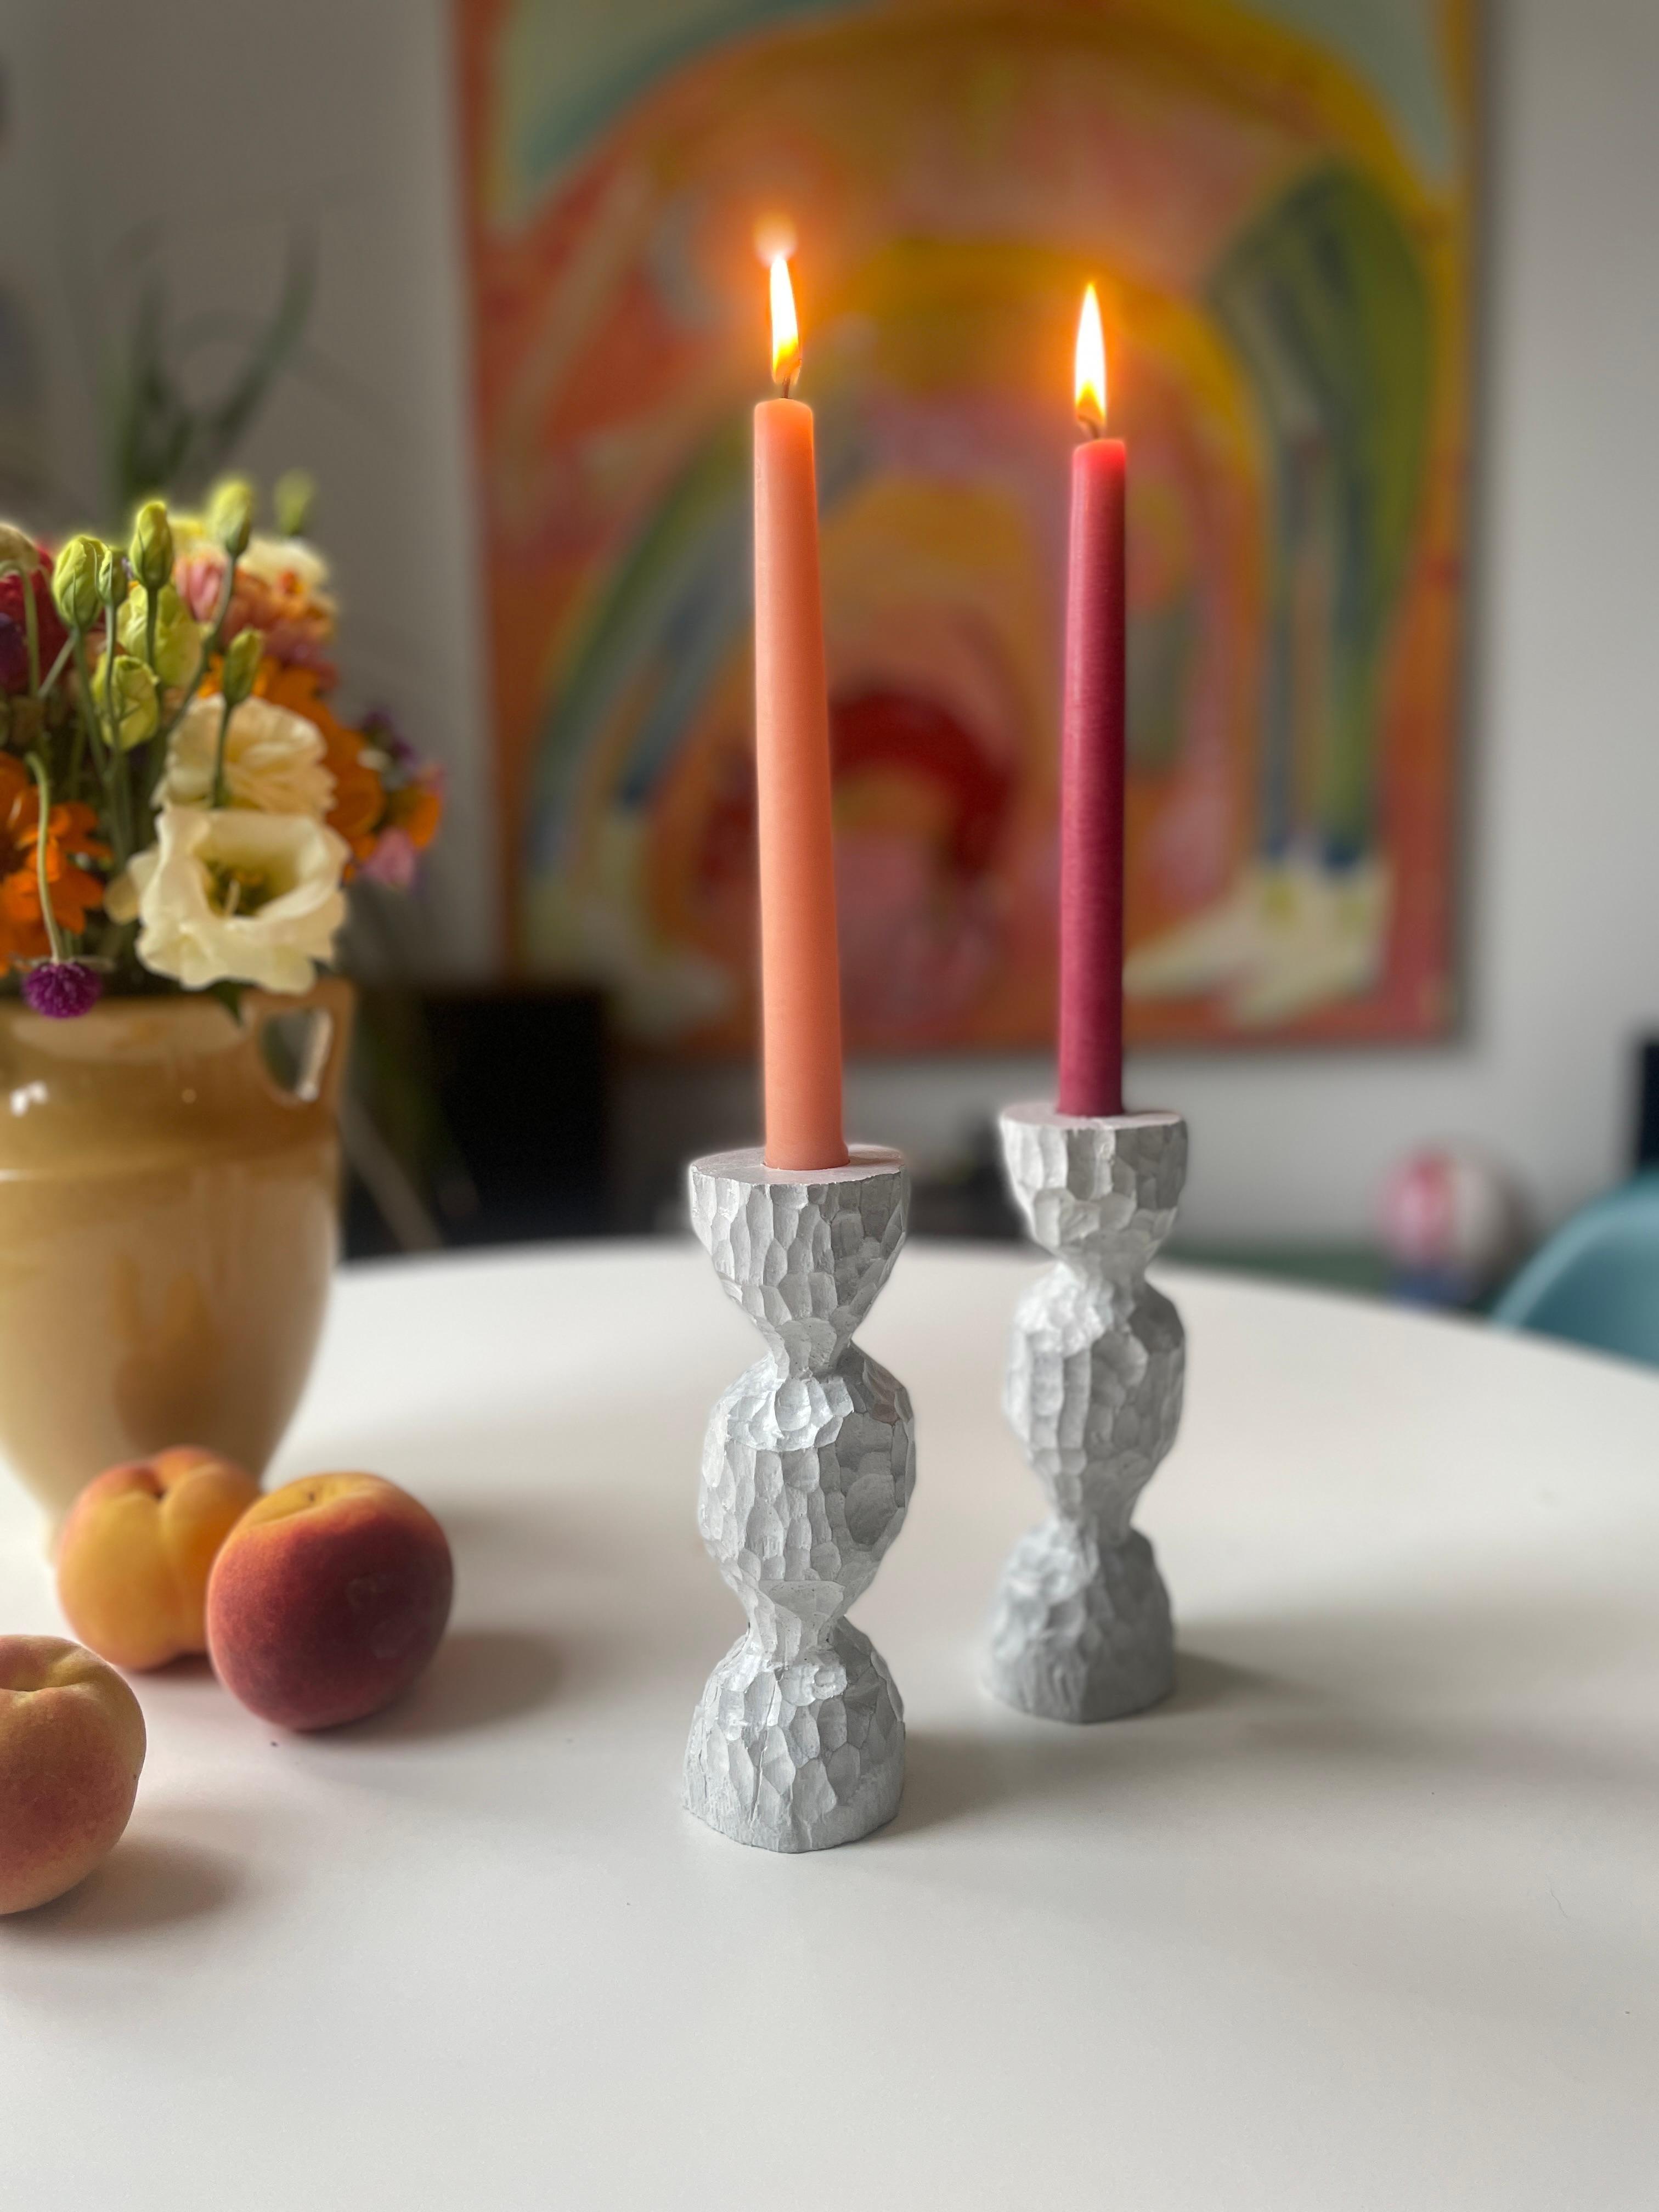 Originally carved in wood, these candlestick holders have been cast in concrete transferring the tool marks of the chiseled wood onto the surface of the concrete candlestick holder. 

Finished by hand with a pigmented wax creates unique variations